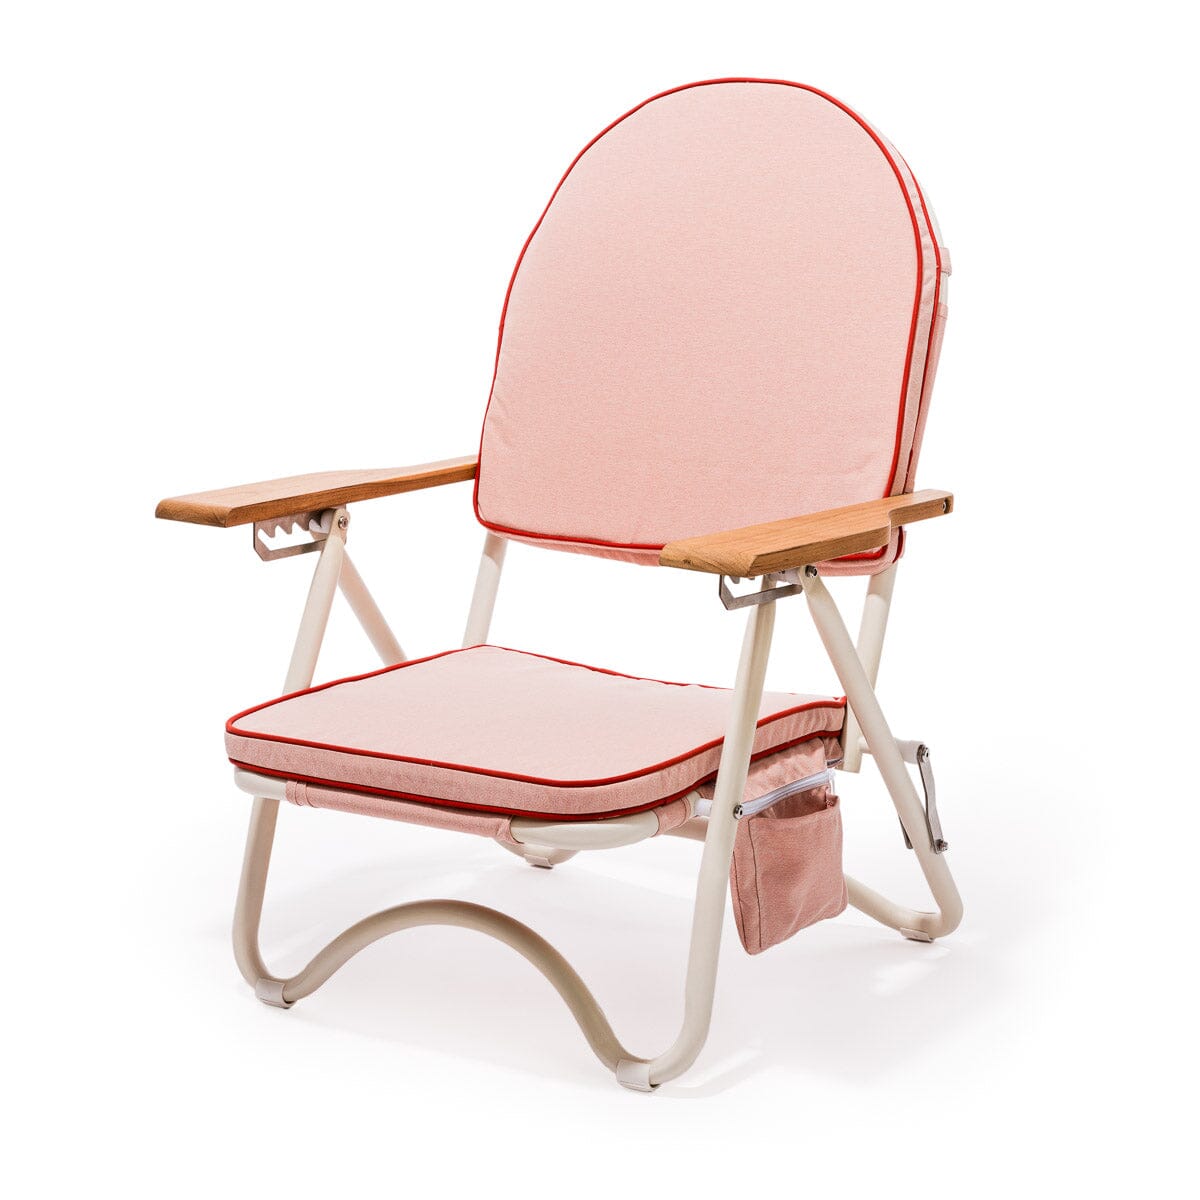 The Pam Chair - Rivie Pink Pam Chair Business & Pleasure Co Aus 